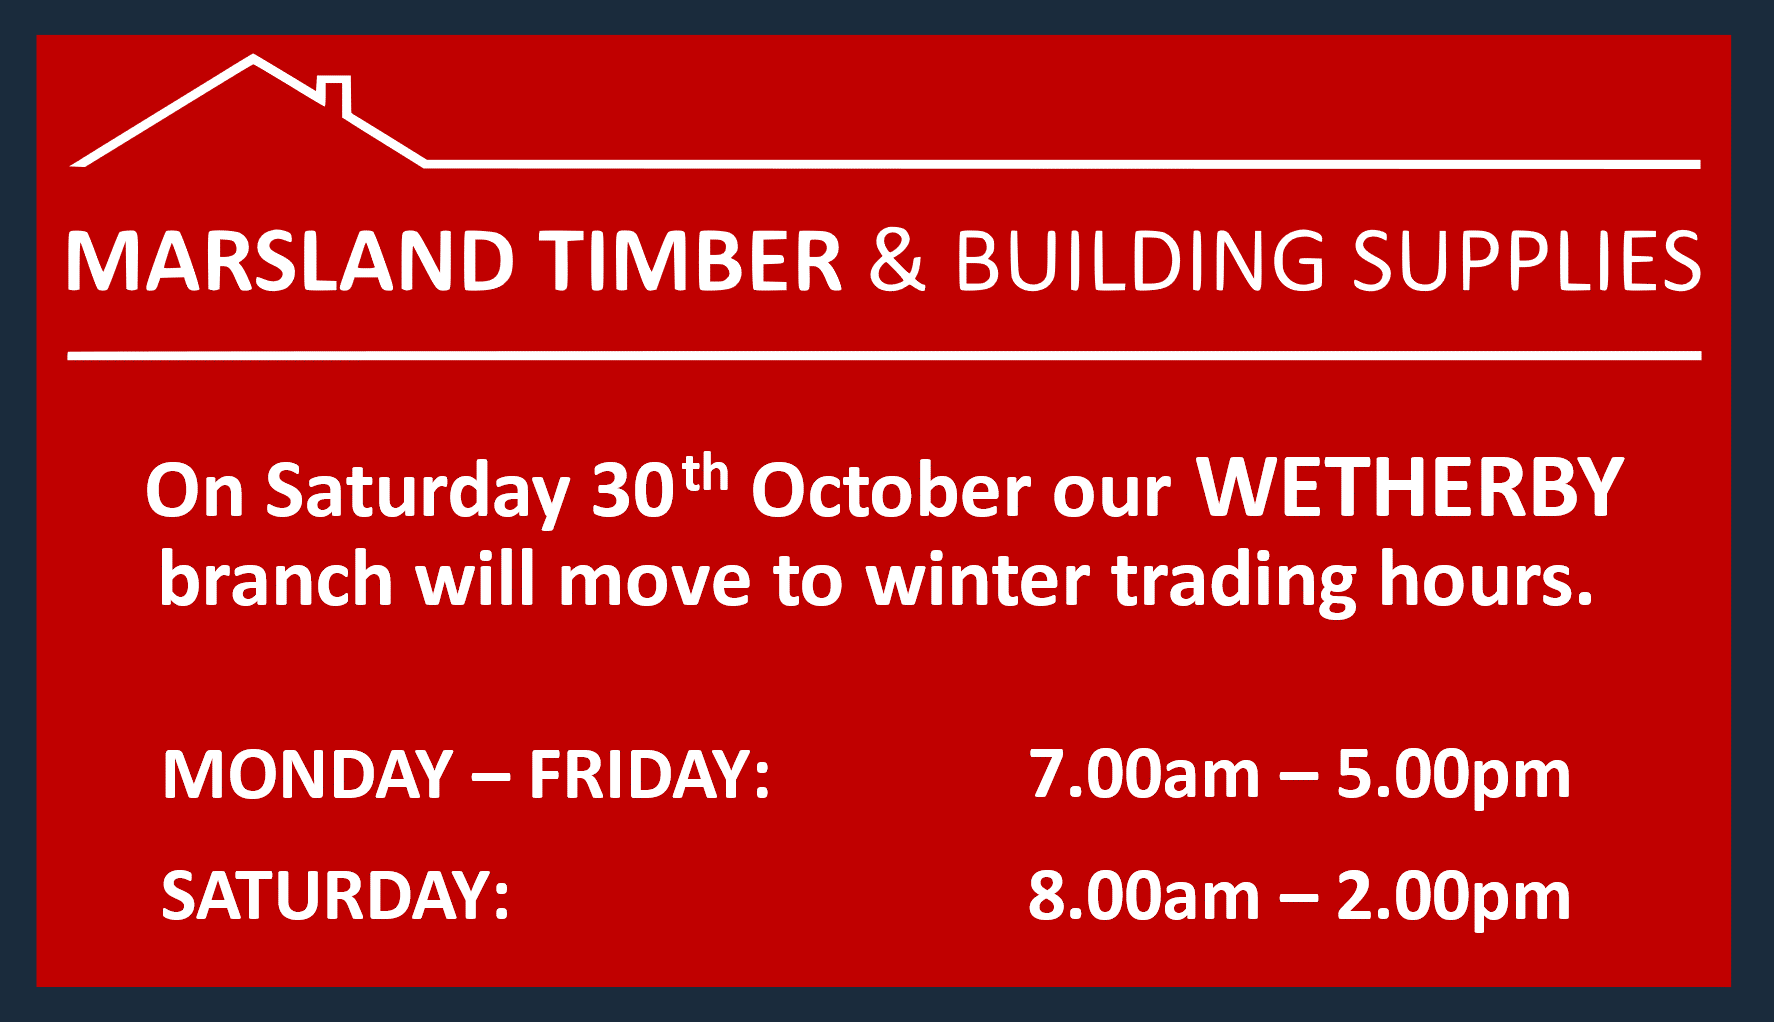 Winter Trading Hours at Wetherby